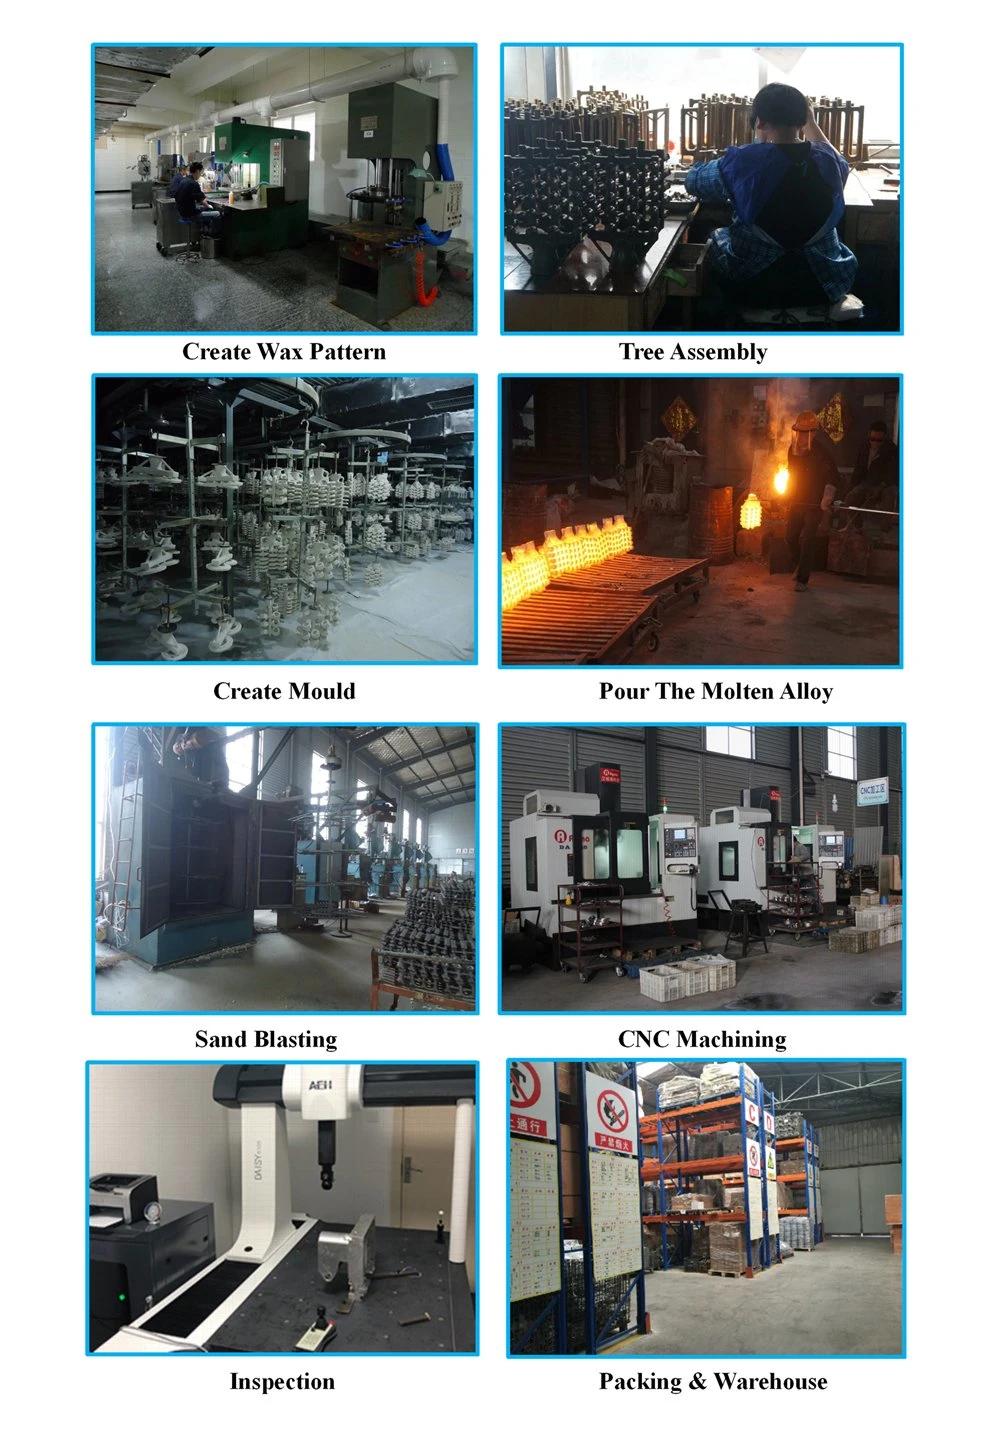 Carbon Steel Die Cast Investment Casting Factory Metal Lost Wax Casting Boat Marine Hardware Accessories